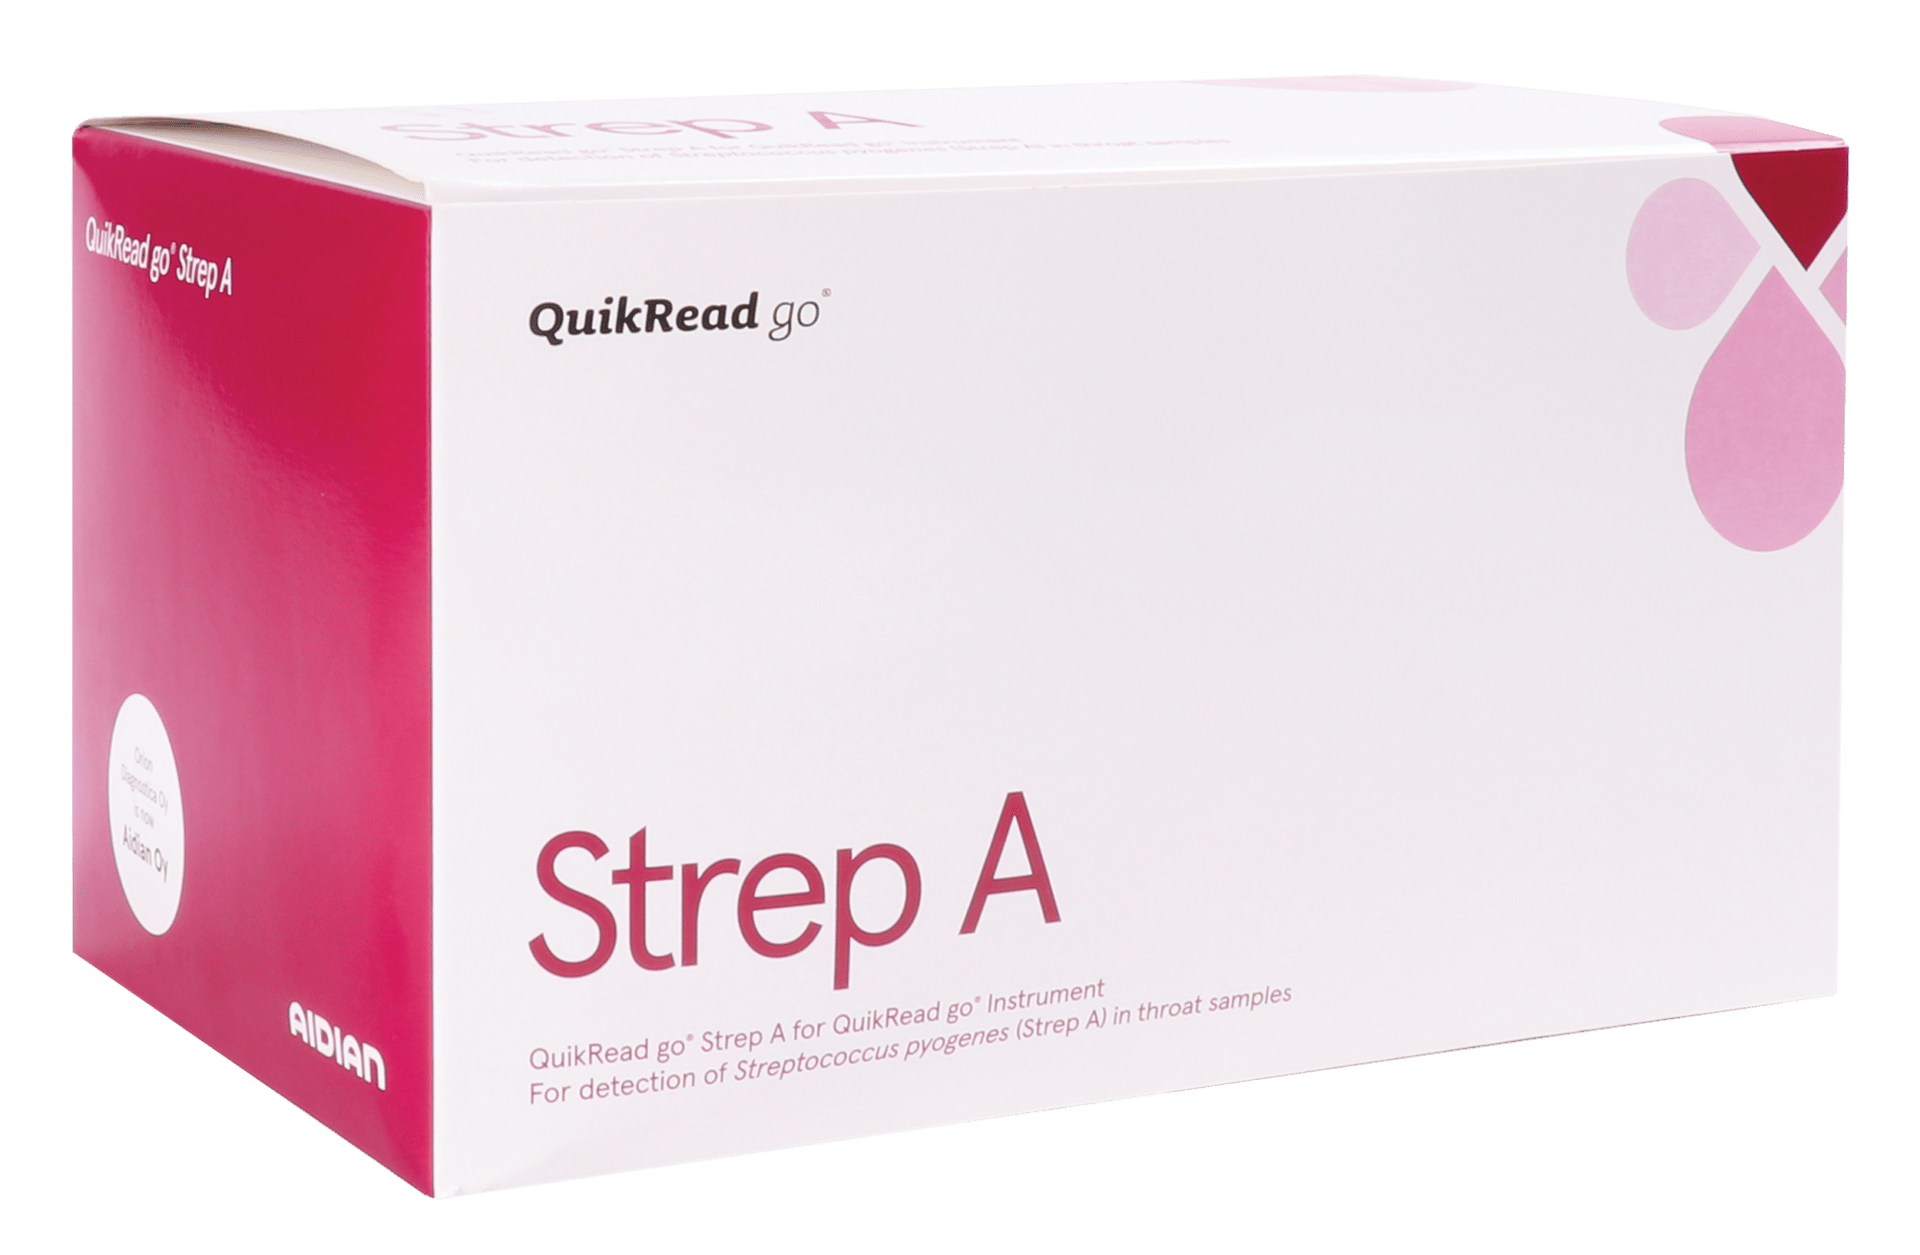 QuikRead go Strep A tests